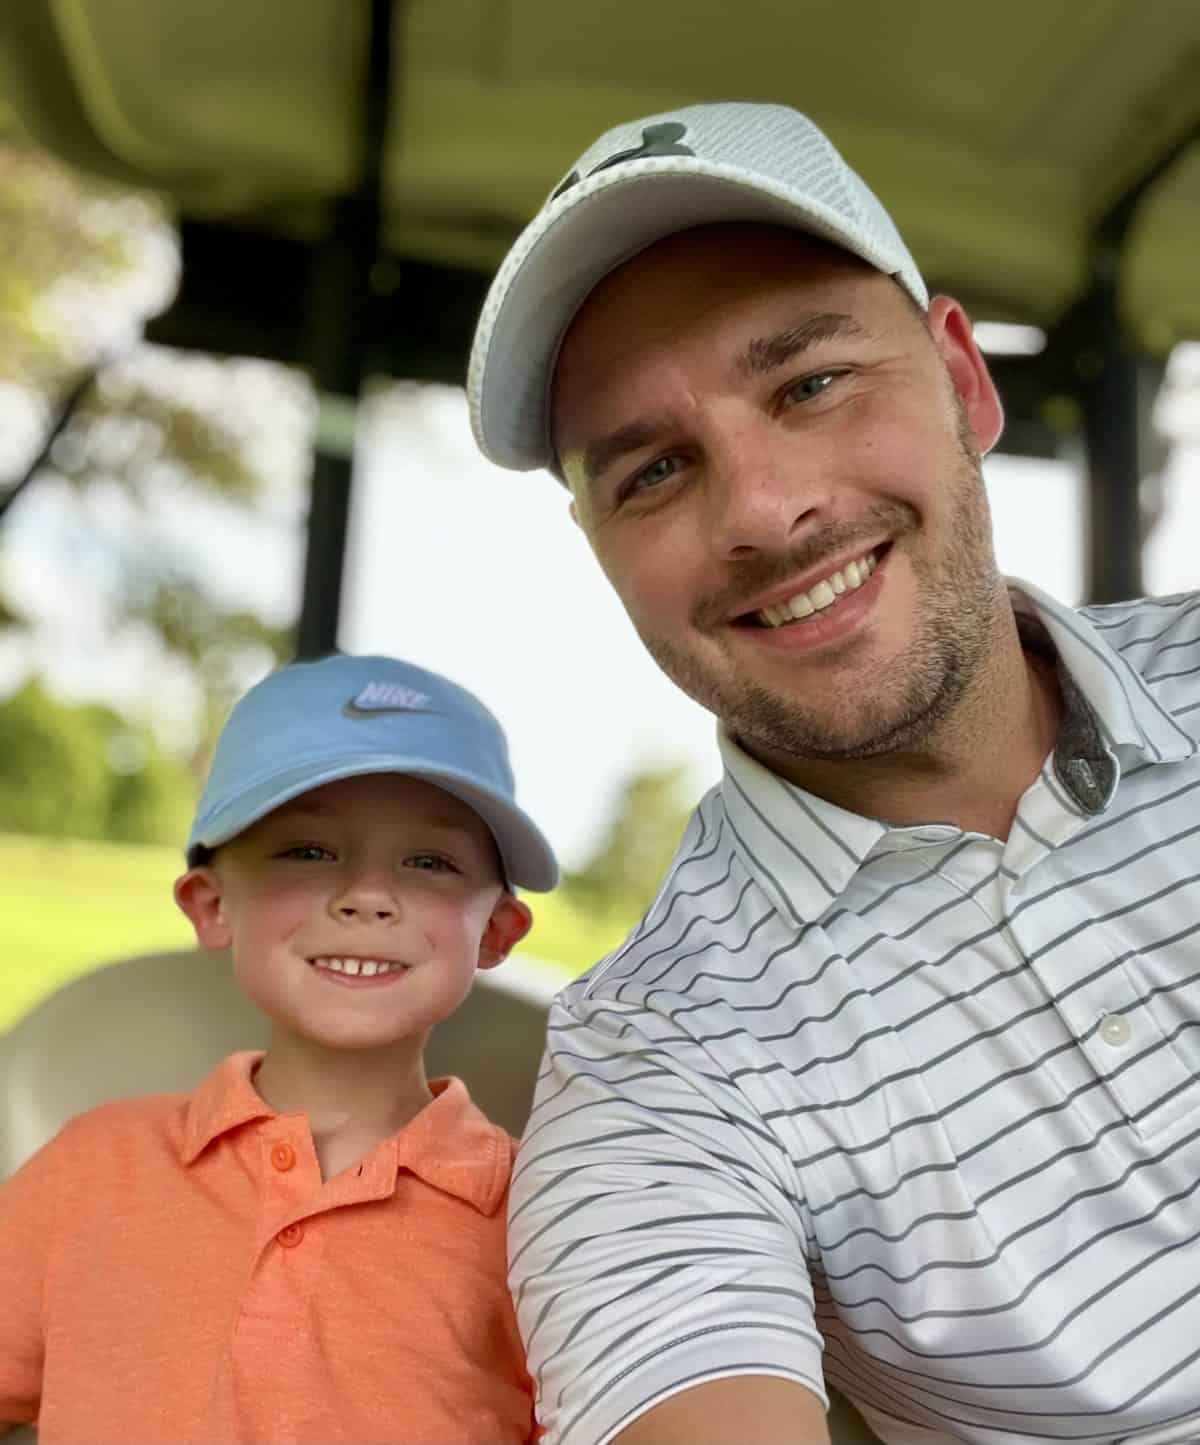 Having fun golfing with kids - father son outdoor activities